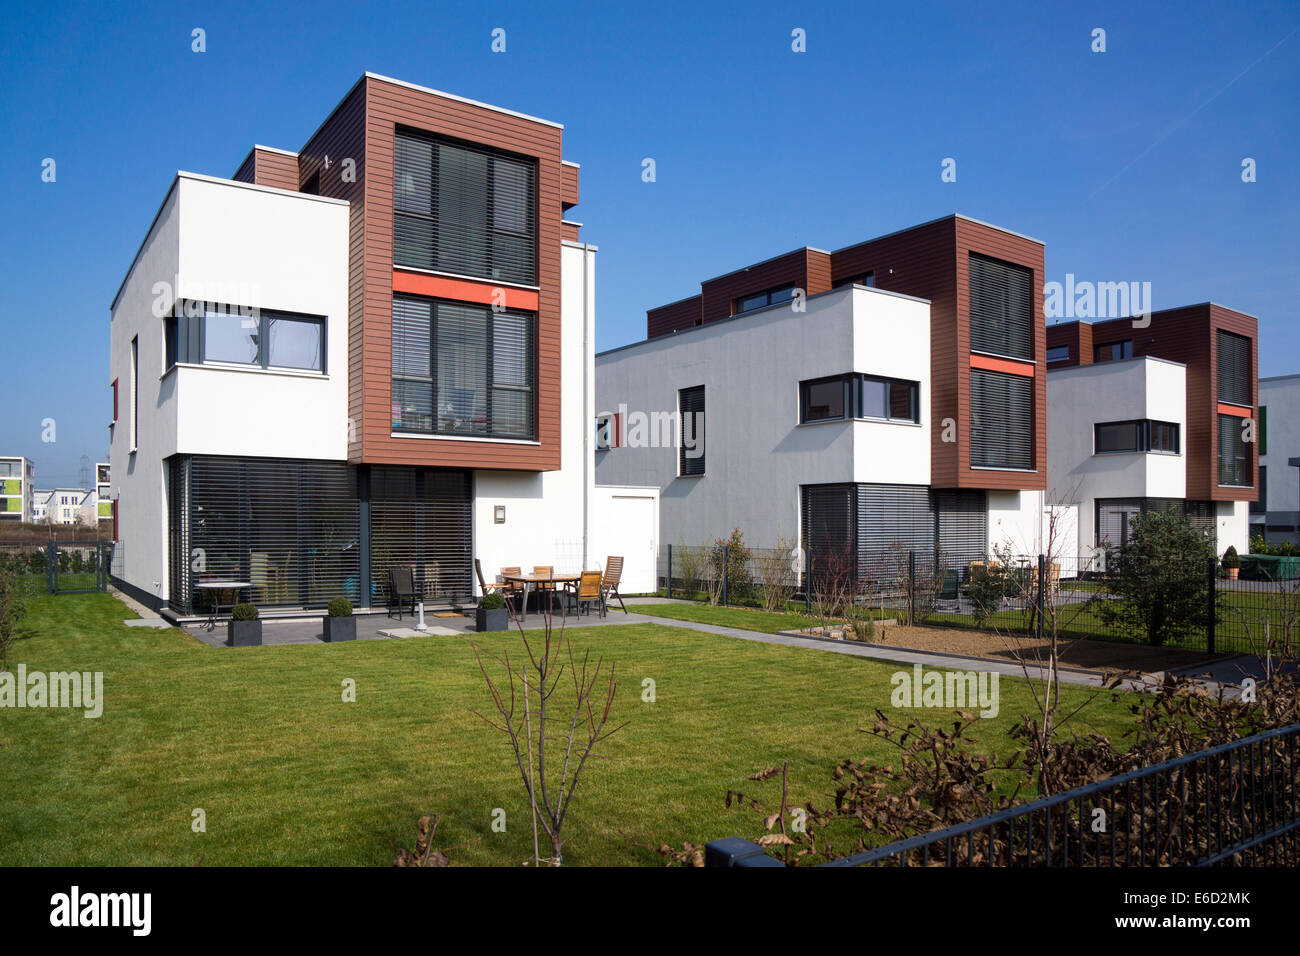 Family house, modern architecture in the Bauhaus style, Riedenberg, Frankfurt am Main, Hesse, Germany Stock Photo